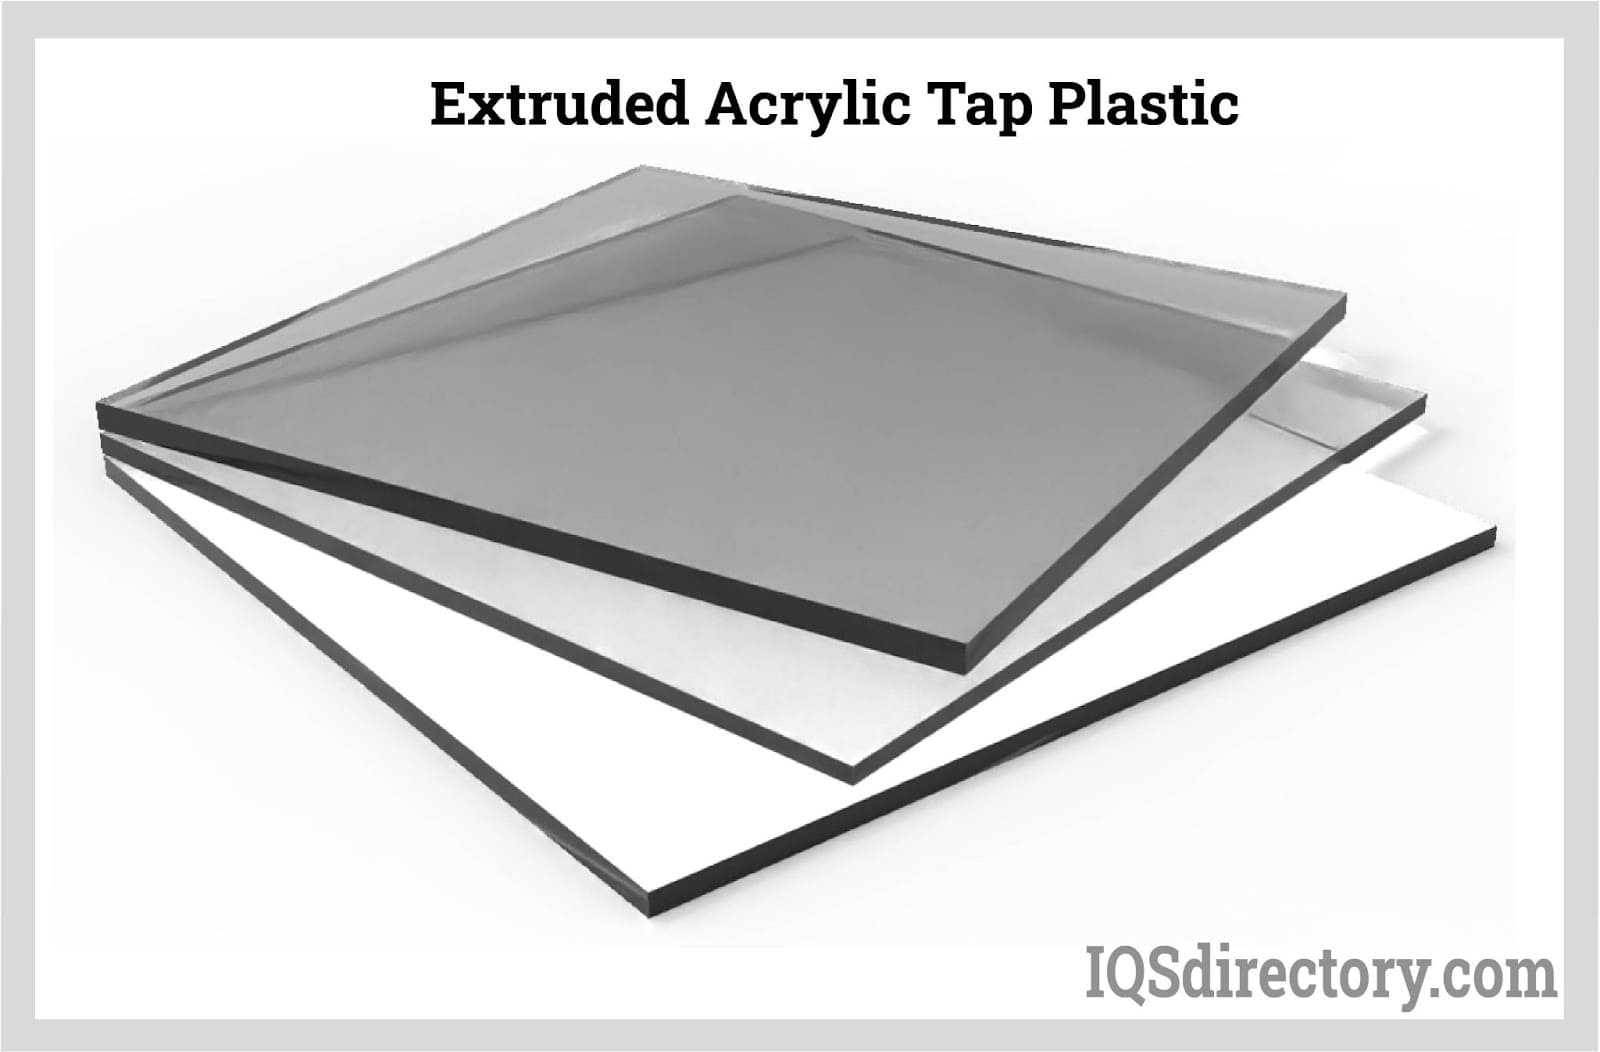 Extruded Acrylic Tap Plastic